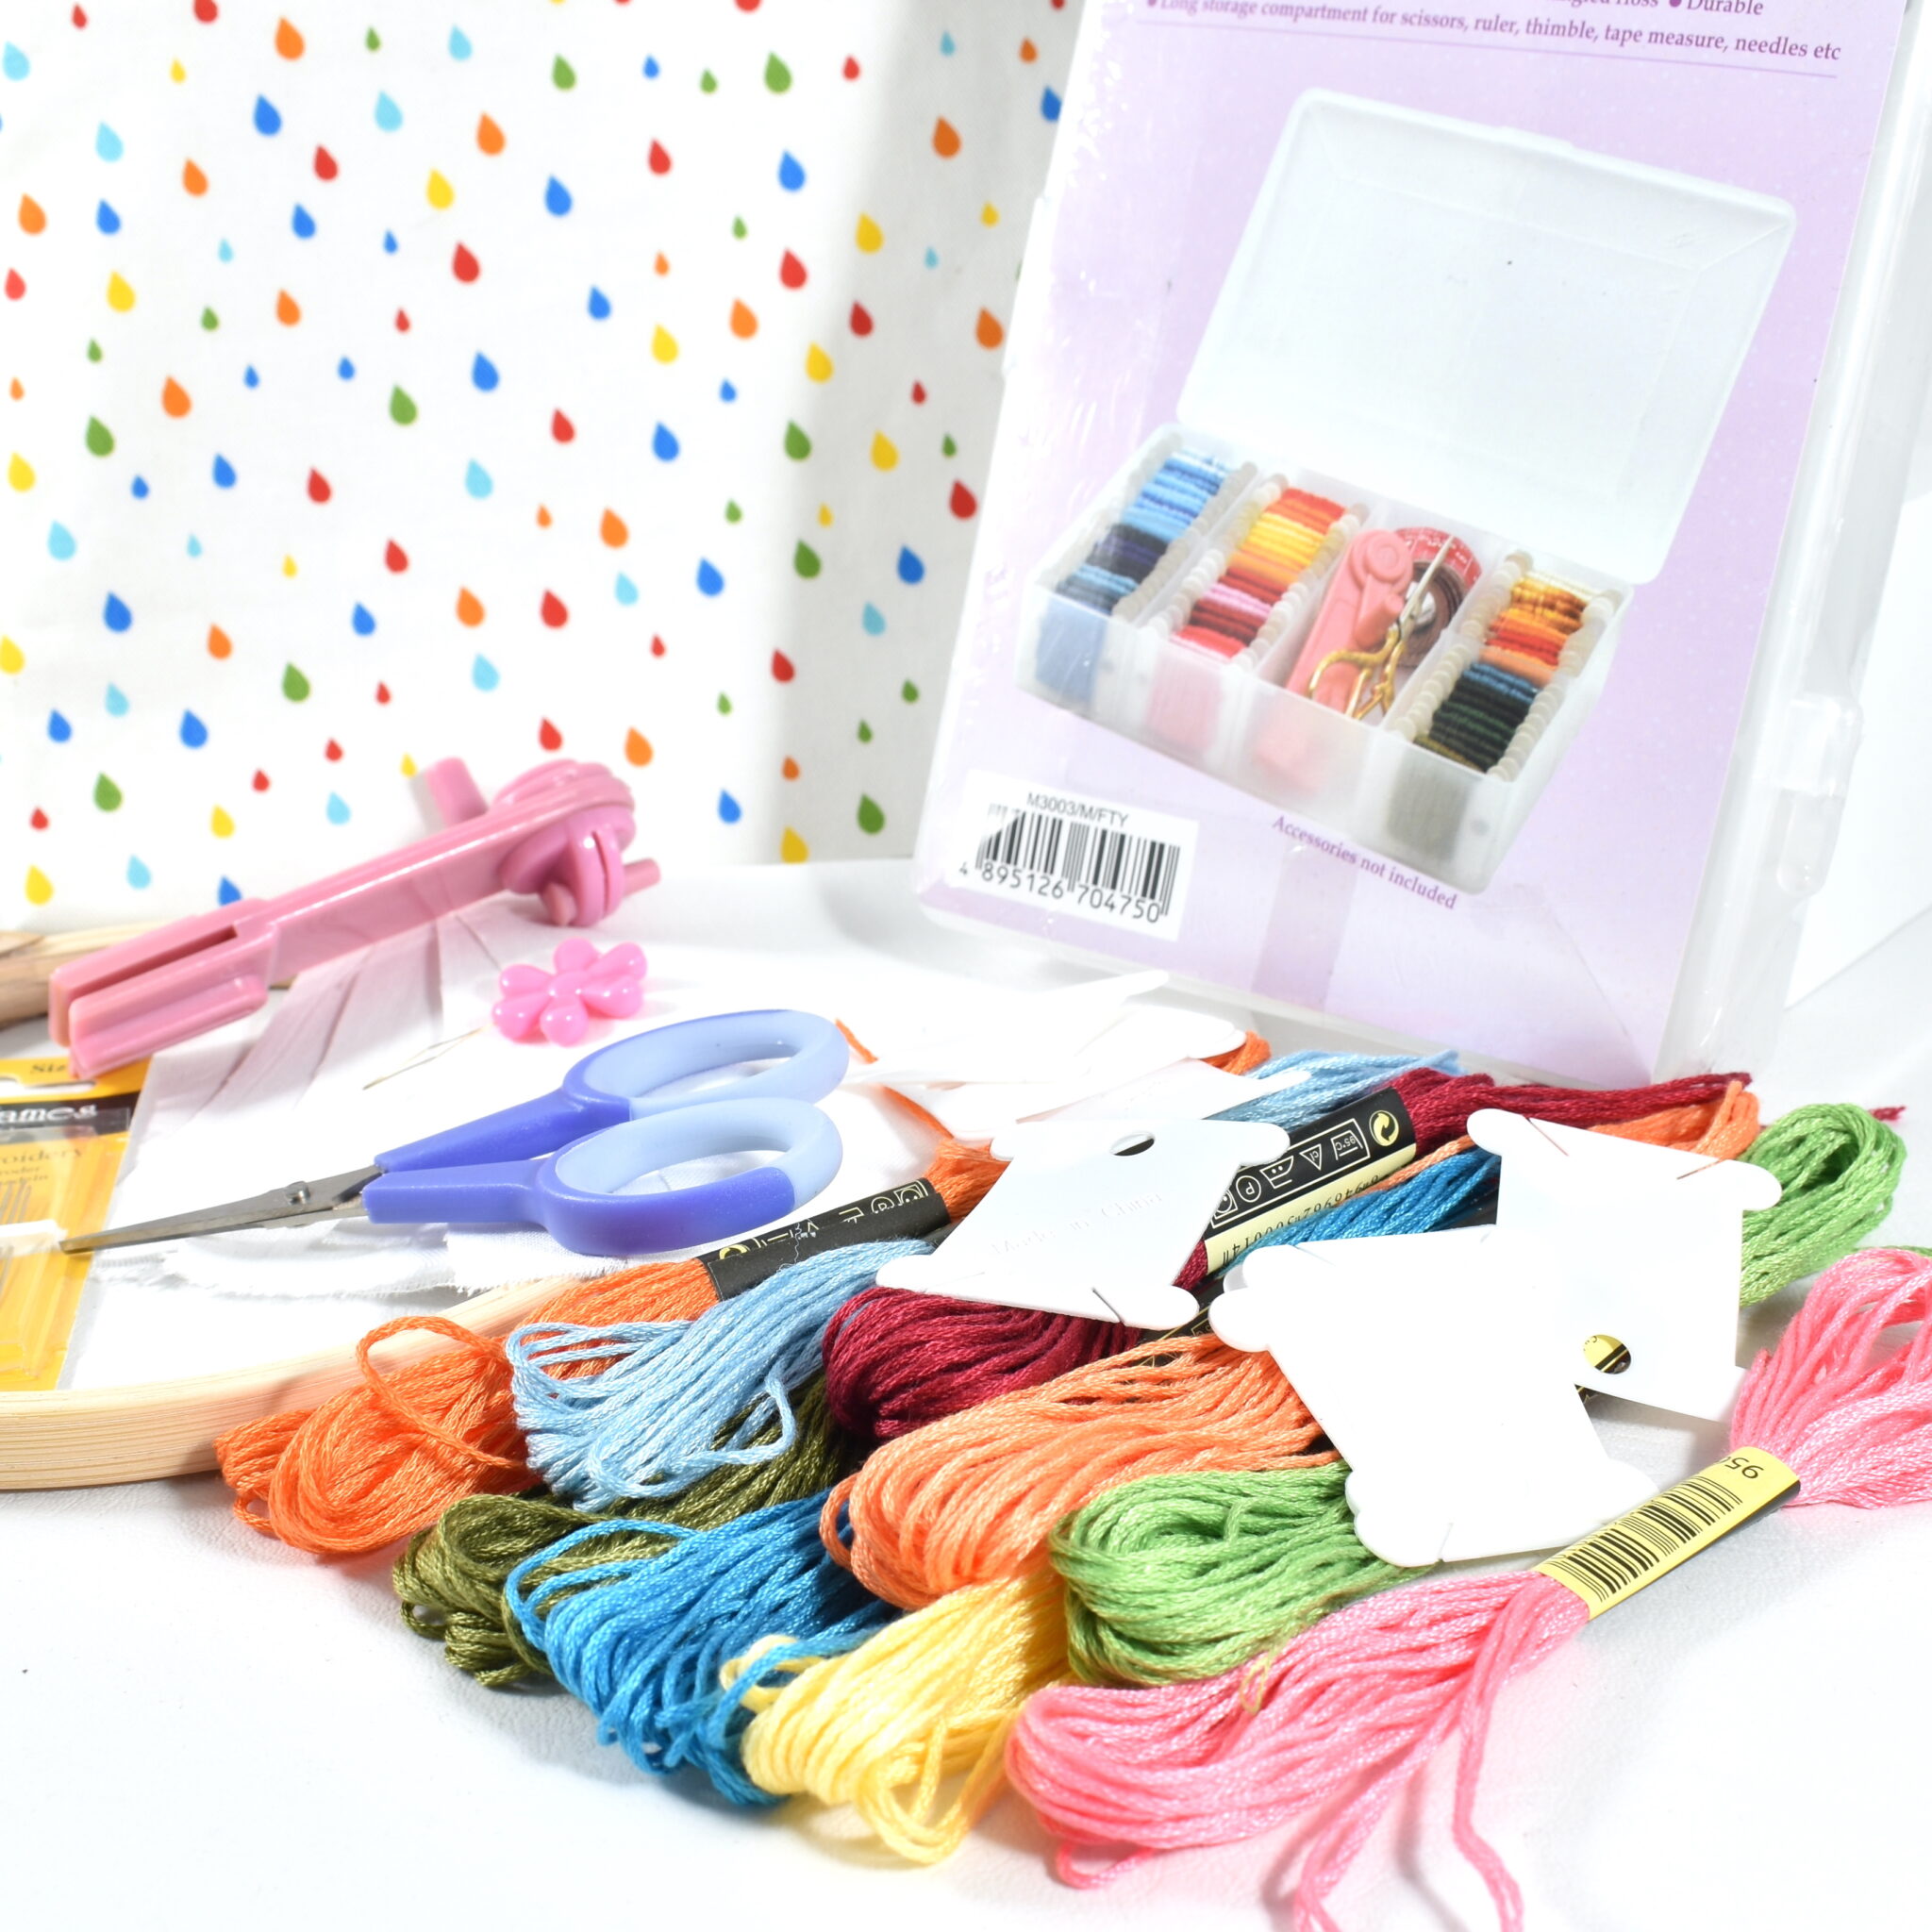 Hand Embroidery Starter Kit | Nationwide Delivery | Fabric8